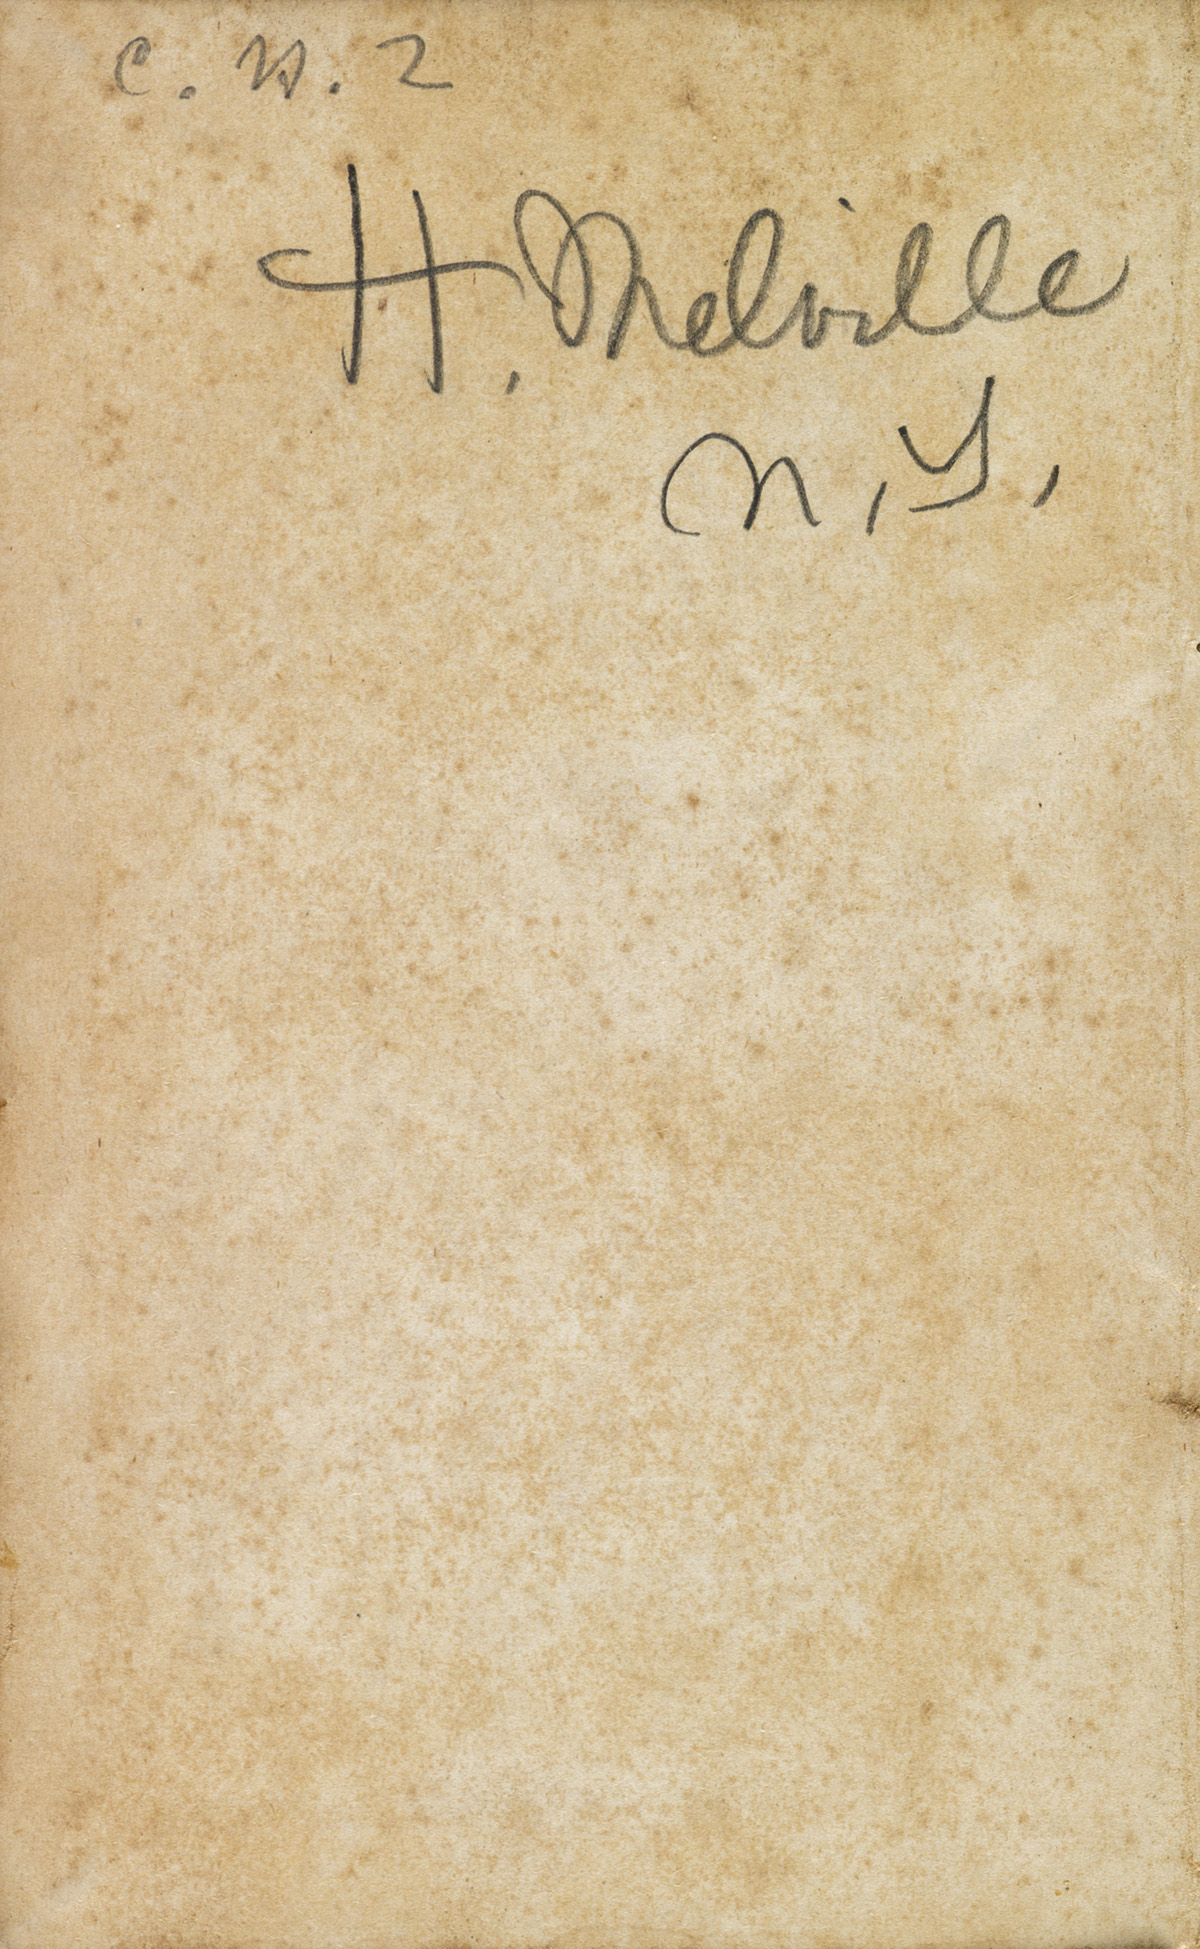 MELVILLE, HERMAN. Two volumes, the first Signed, H. Melville / N.Y., on the front free endpaper, and annotated throughout with over 1